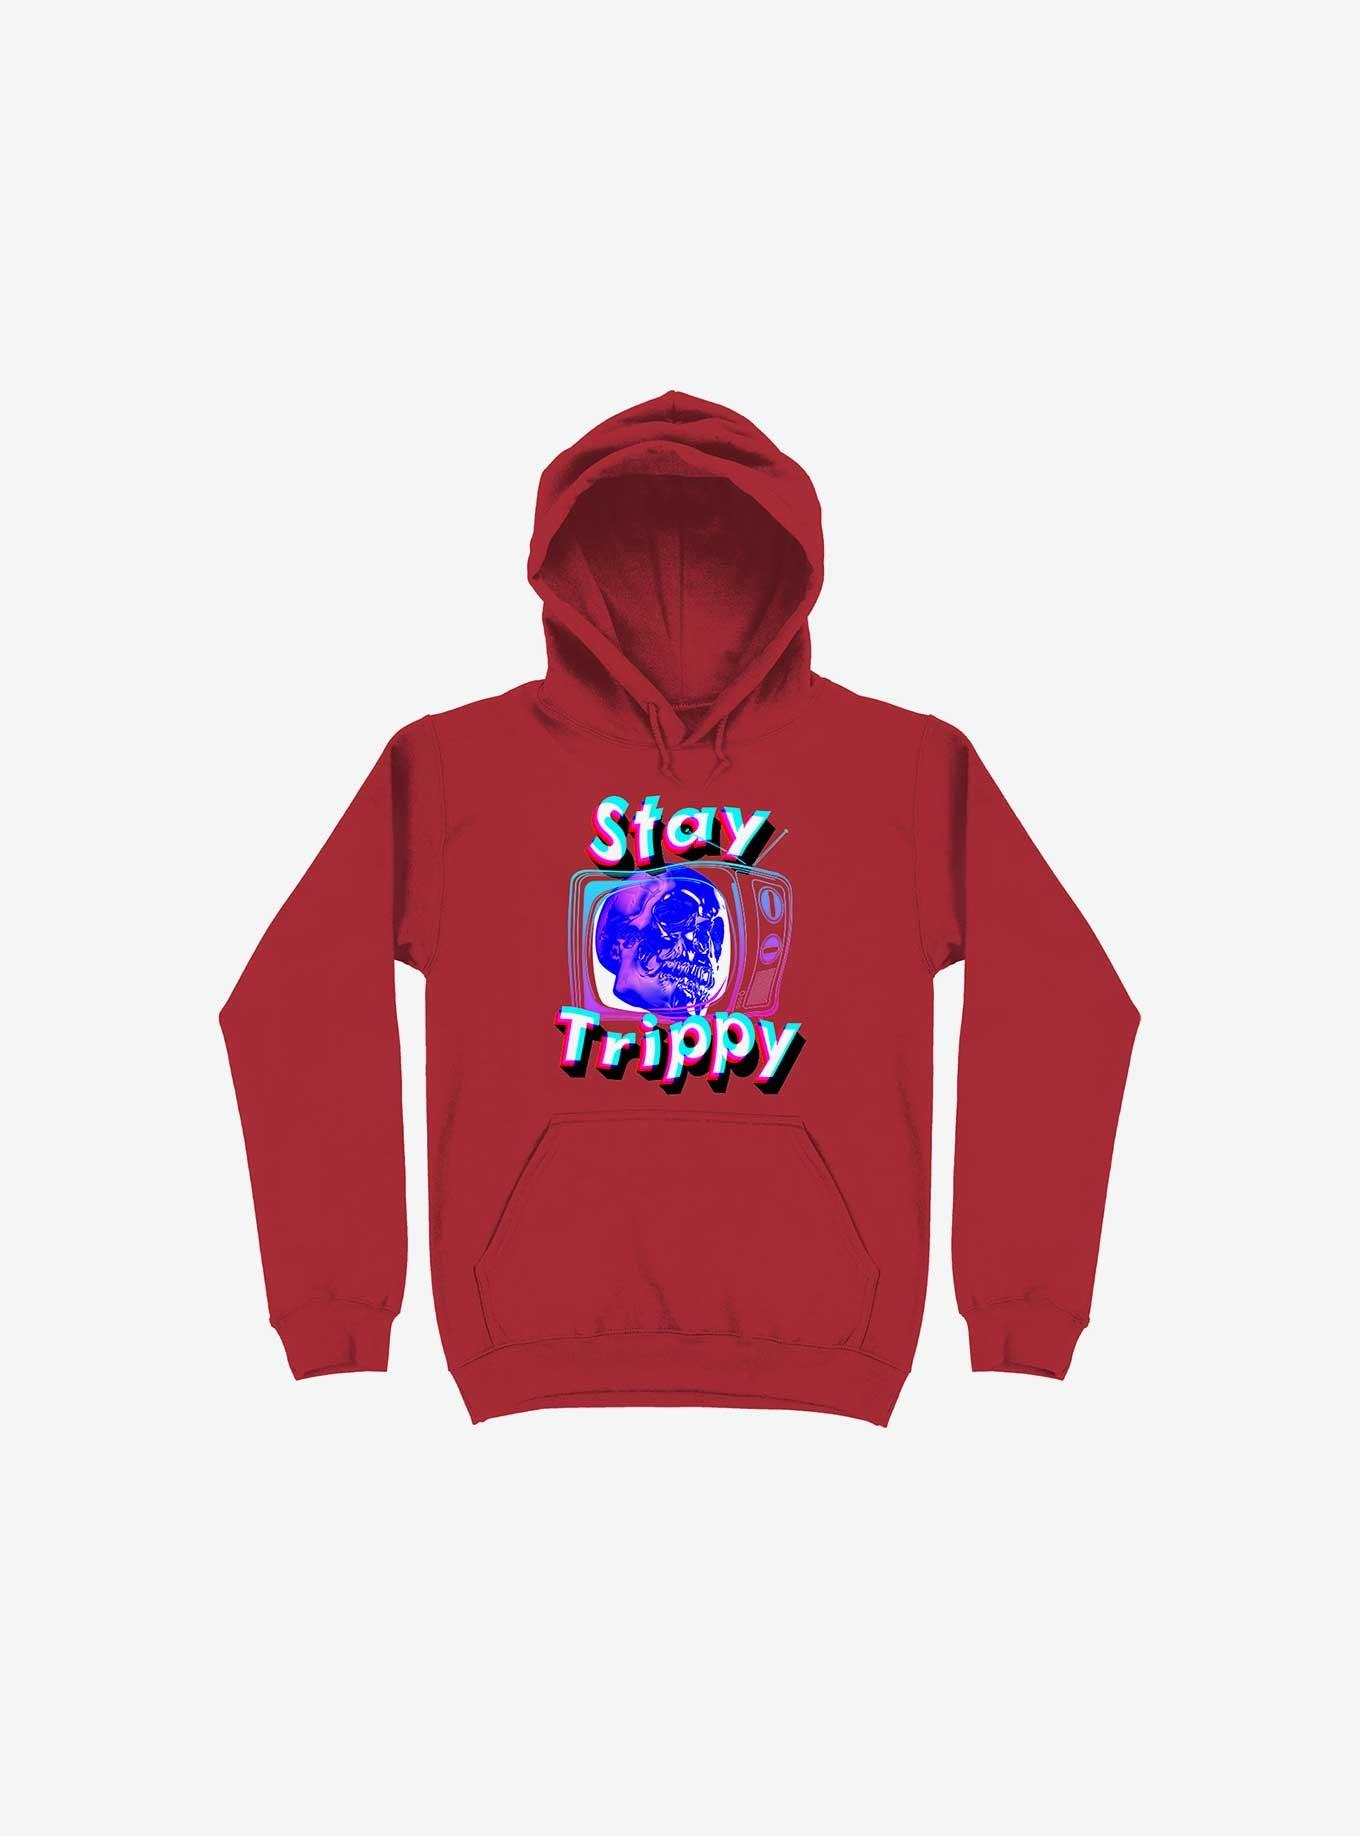 Stay Trippy Cute Retro Aesthetic Universal Vibe Skull Red Hoodie - RED Hot Topic